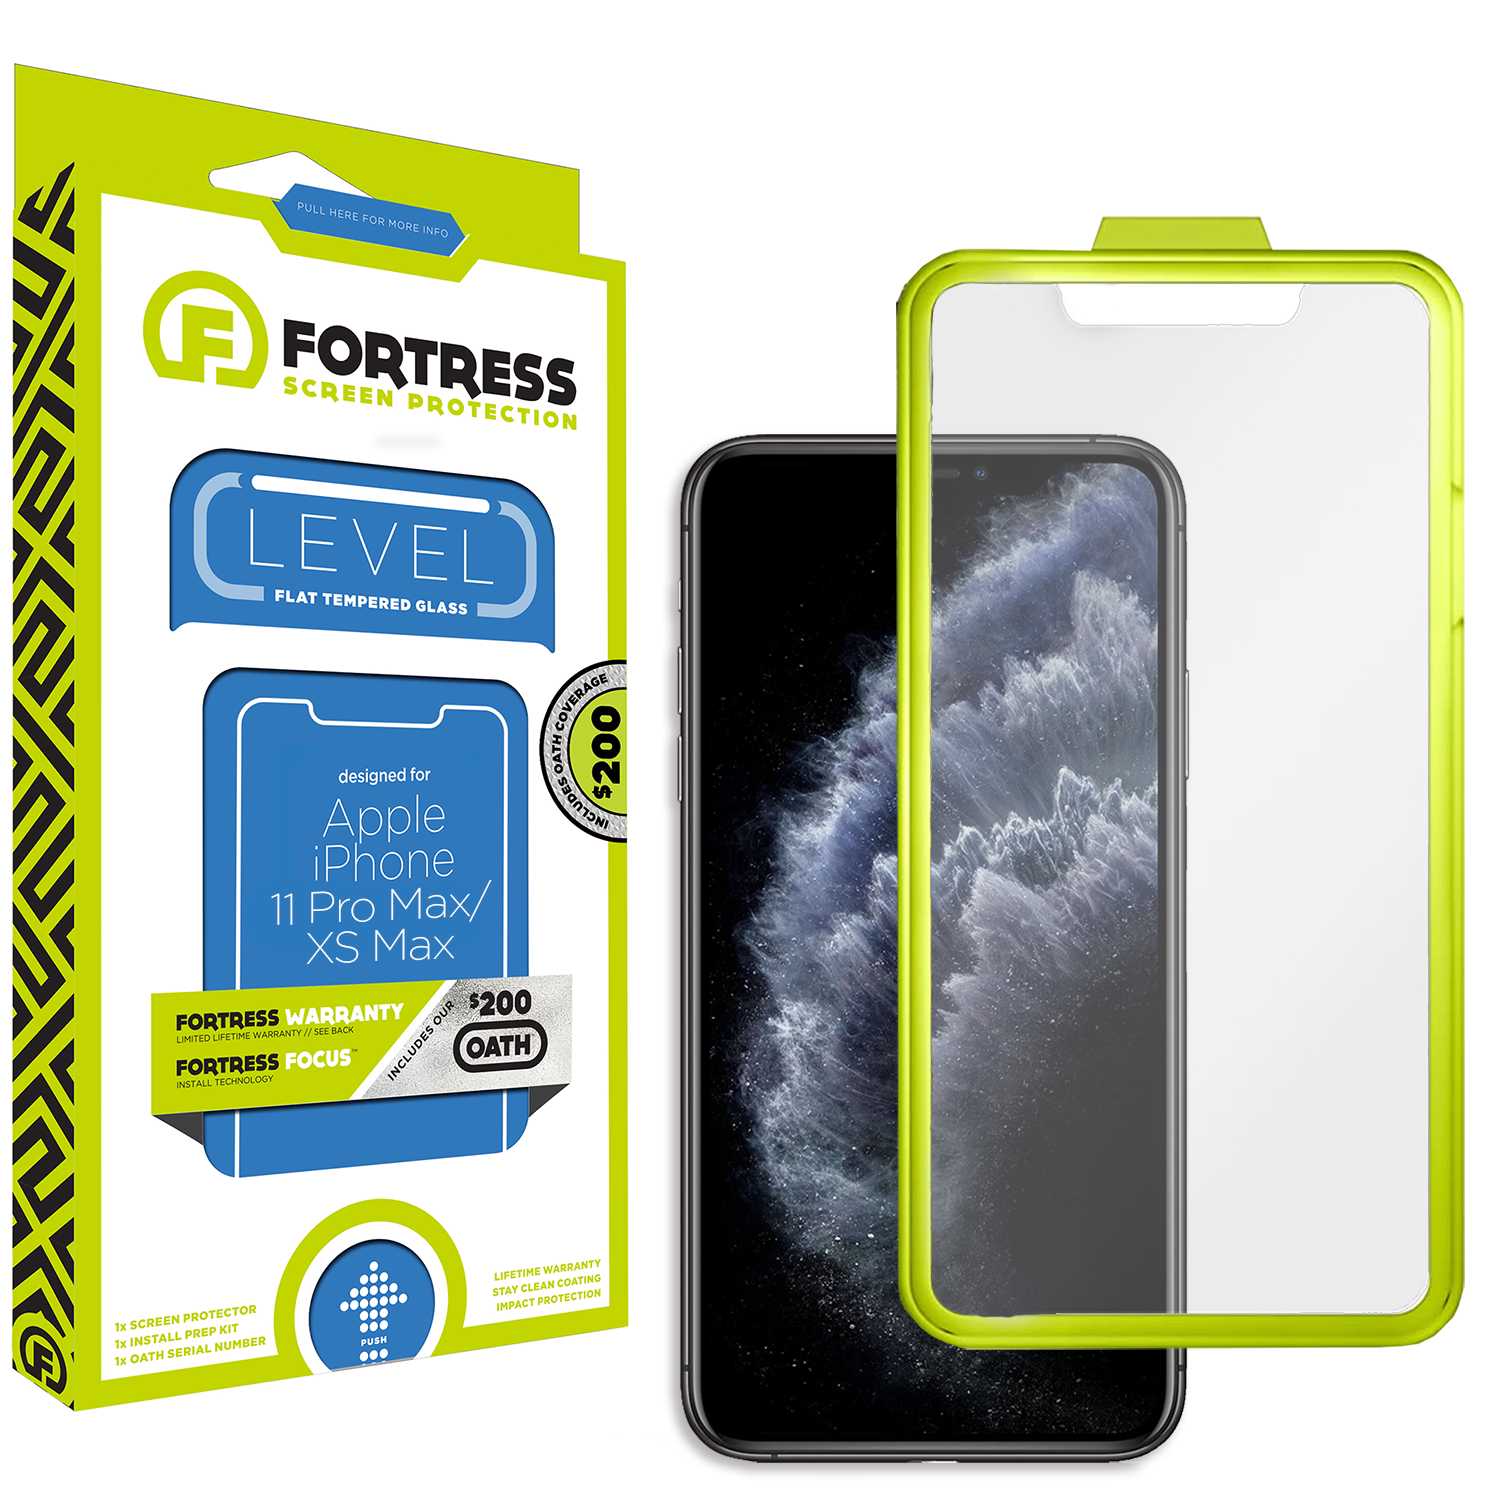 Fortress iPhone XS Max Screen Protector $200CoverageInstallTool Scooch Screen Protector